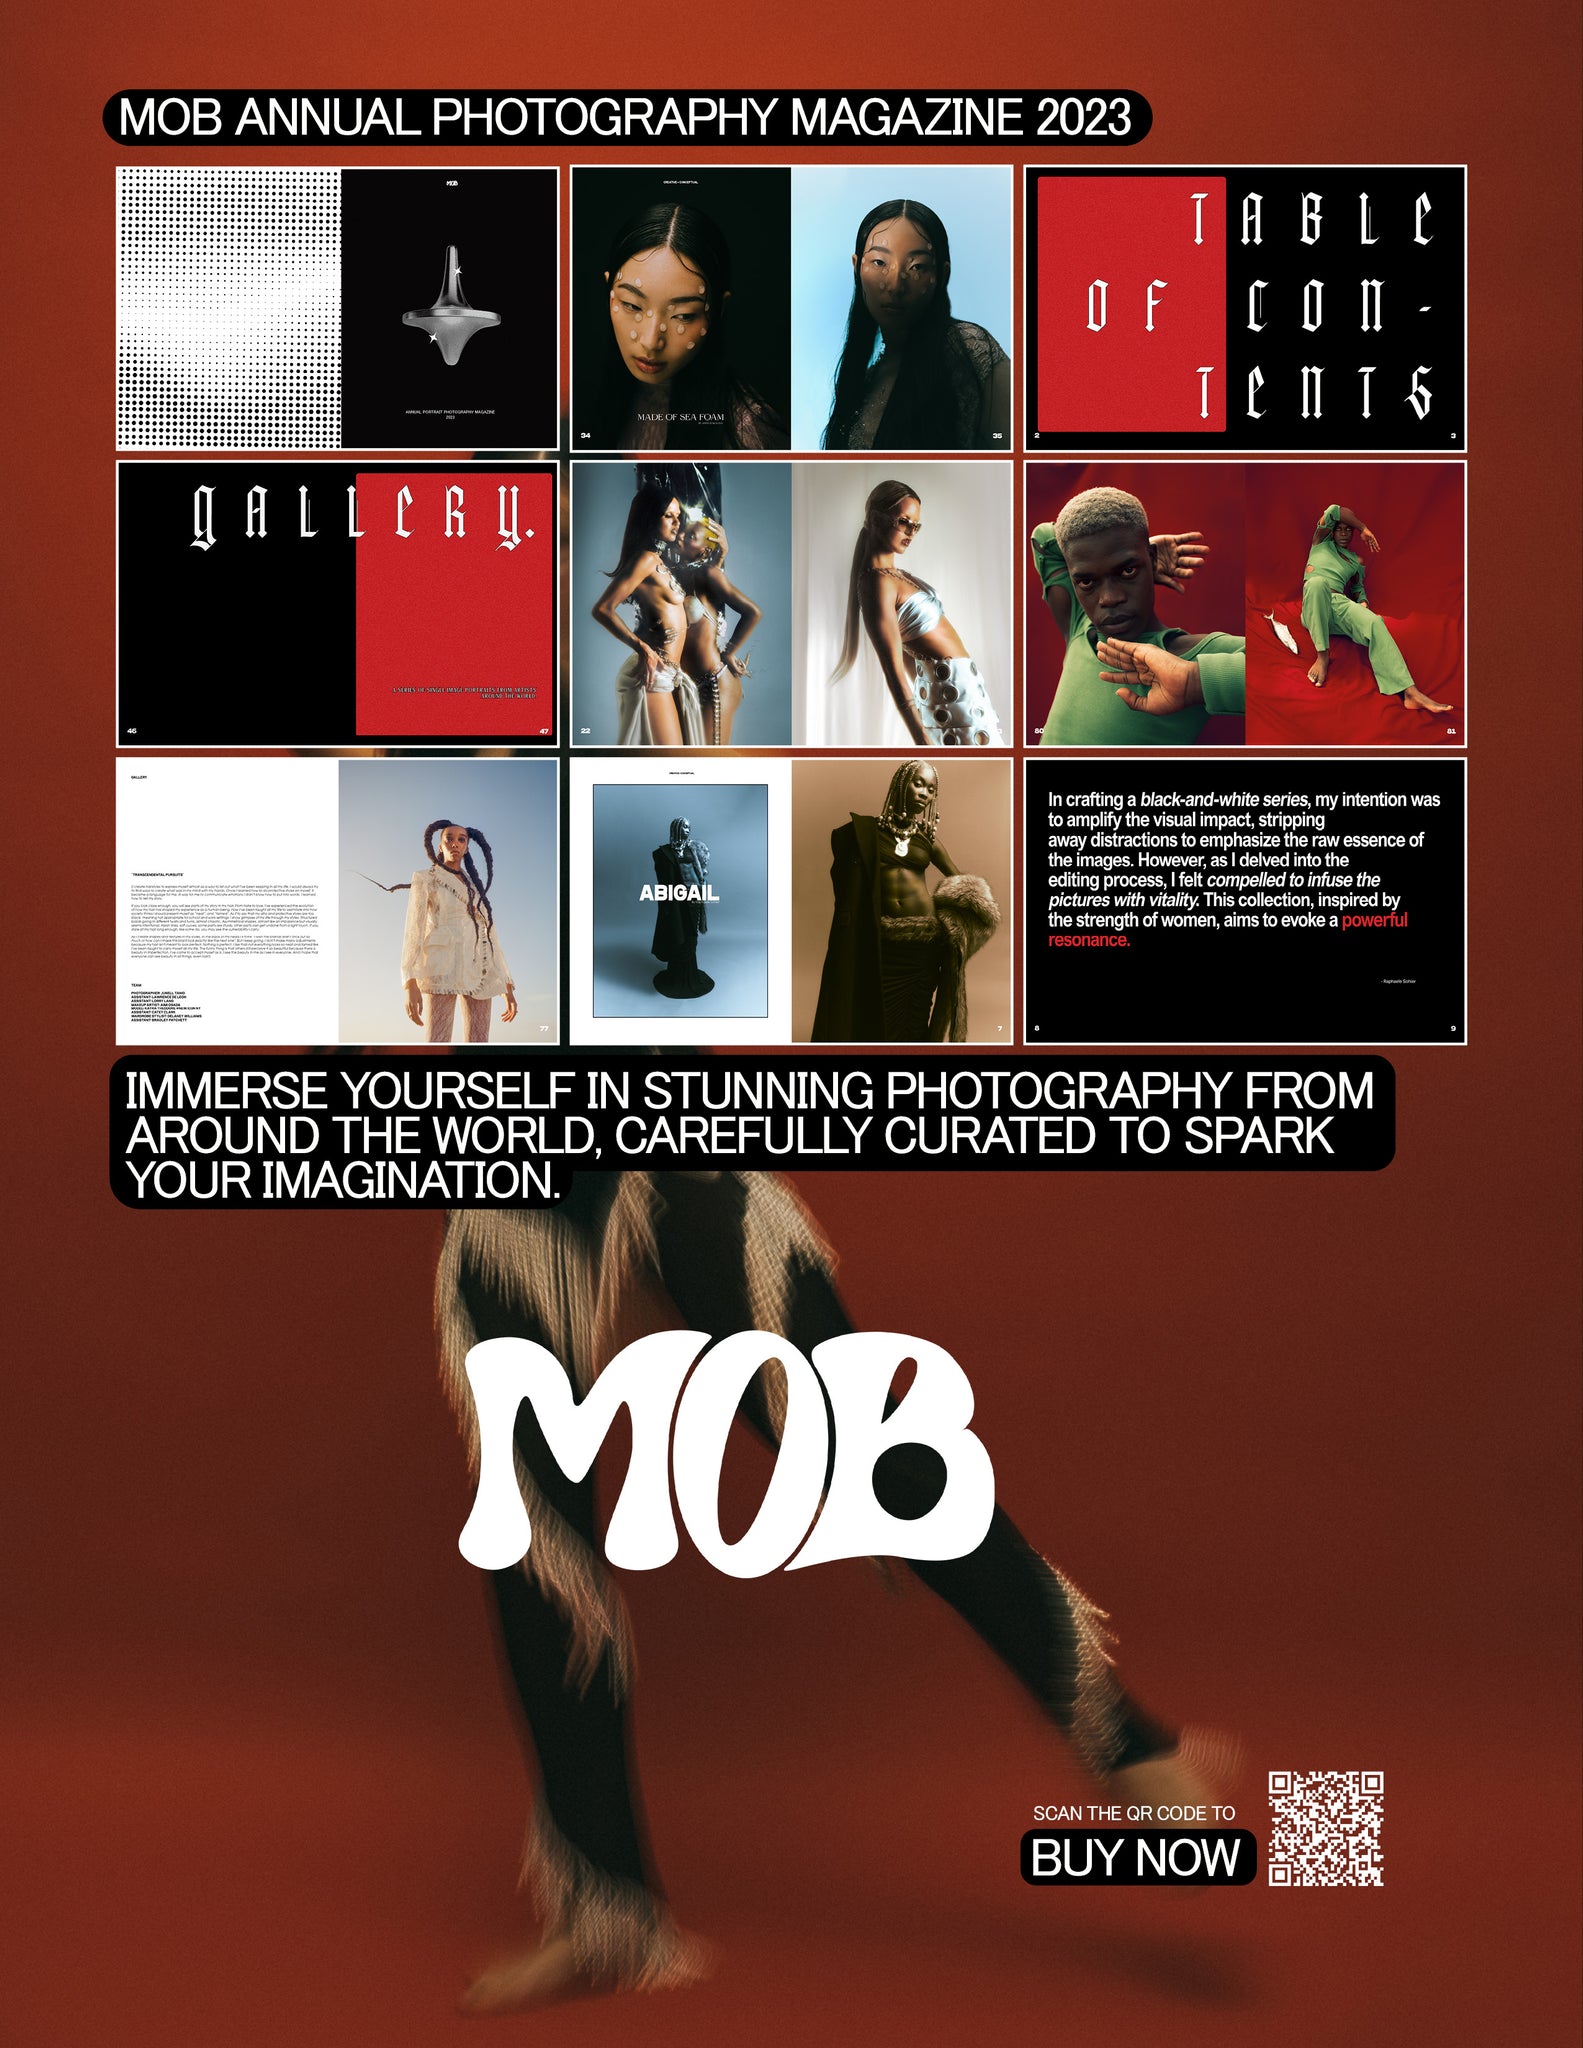 MOB JOURNAL | VOLUME FIFTY| ISSUE #23